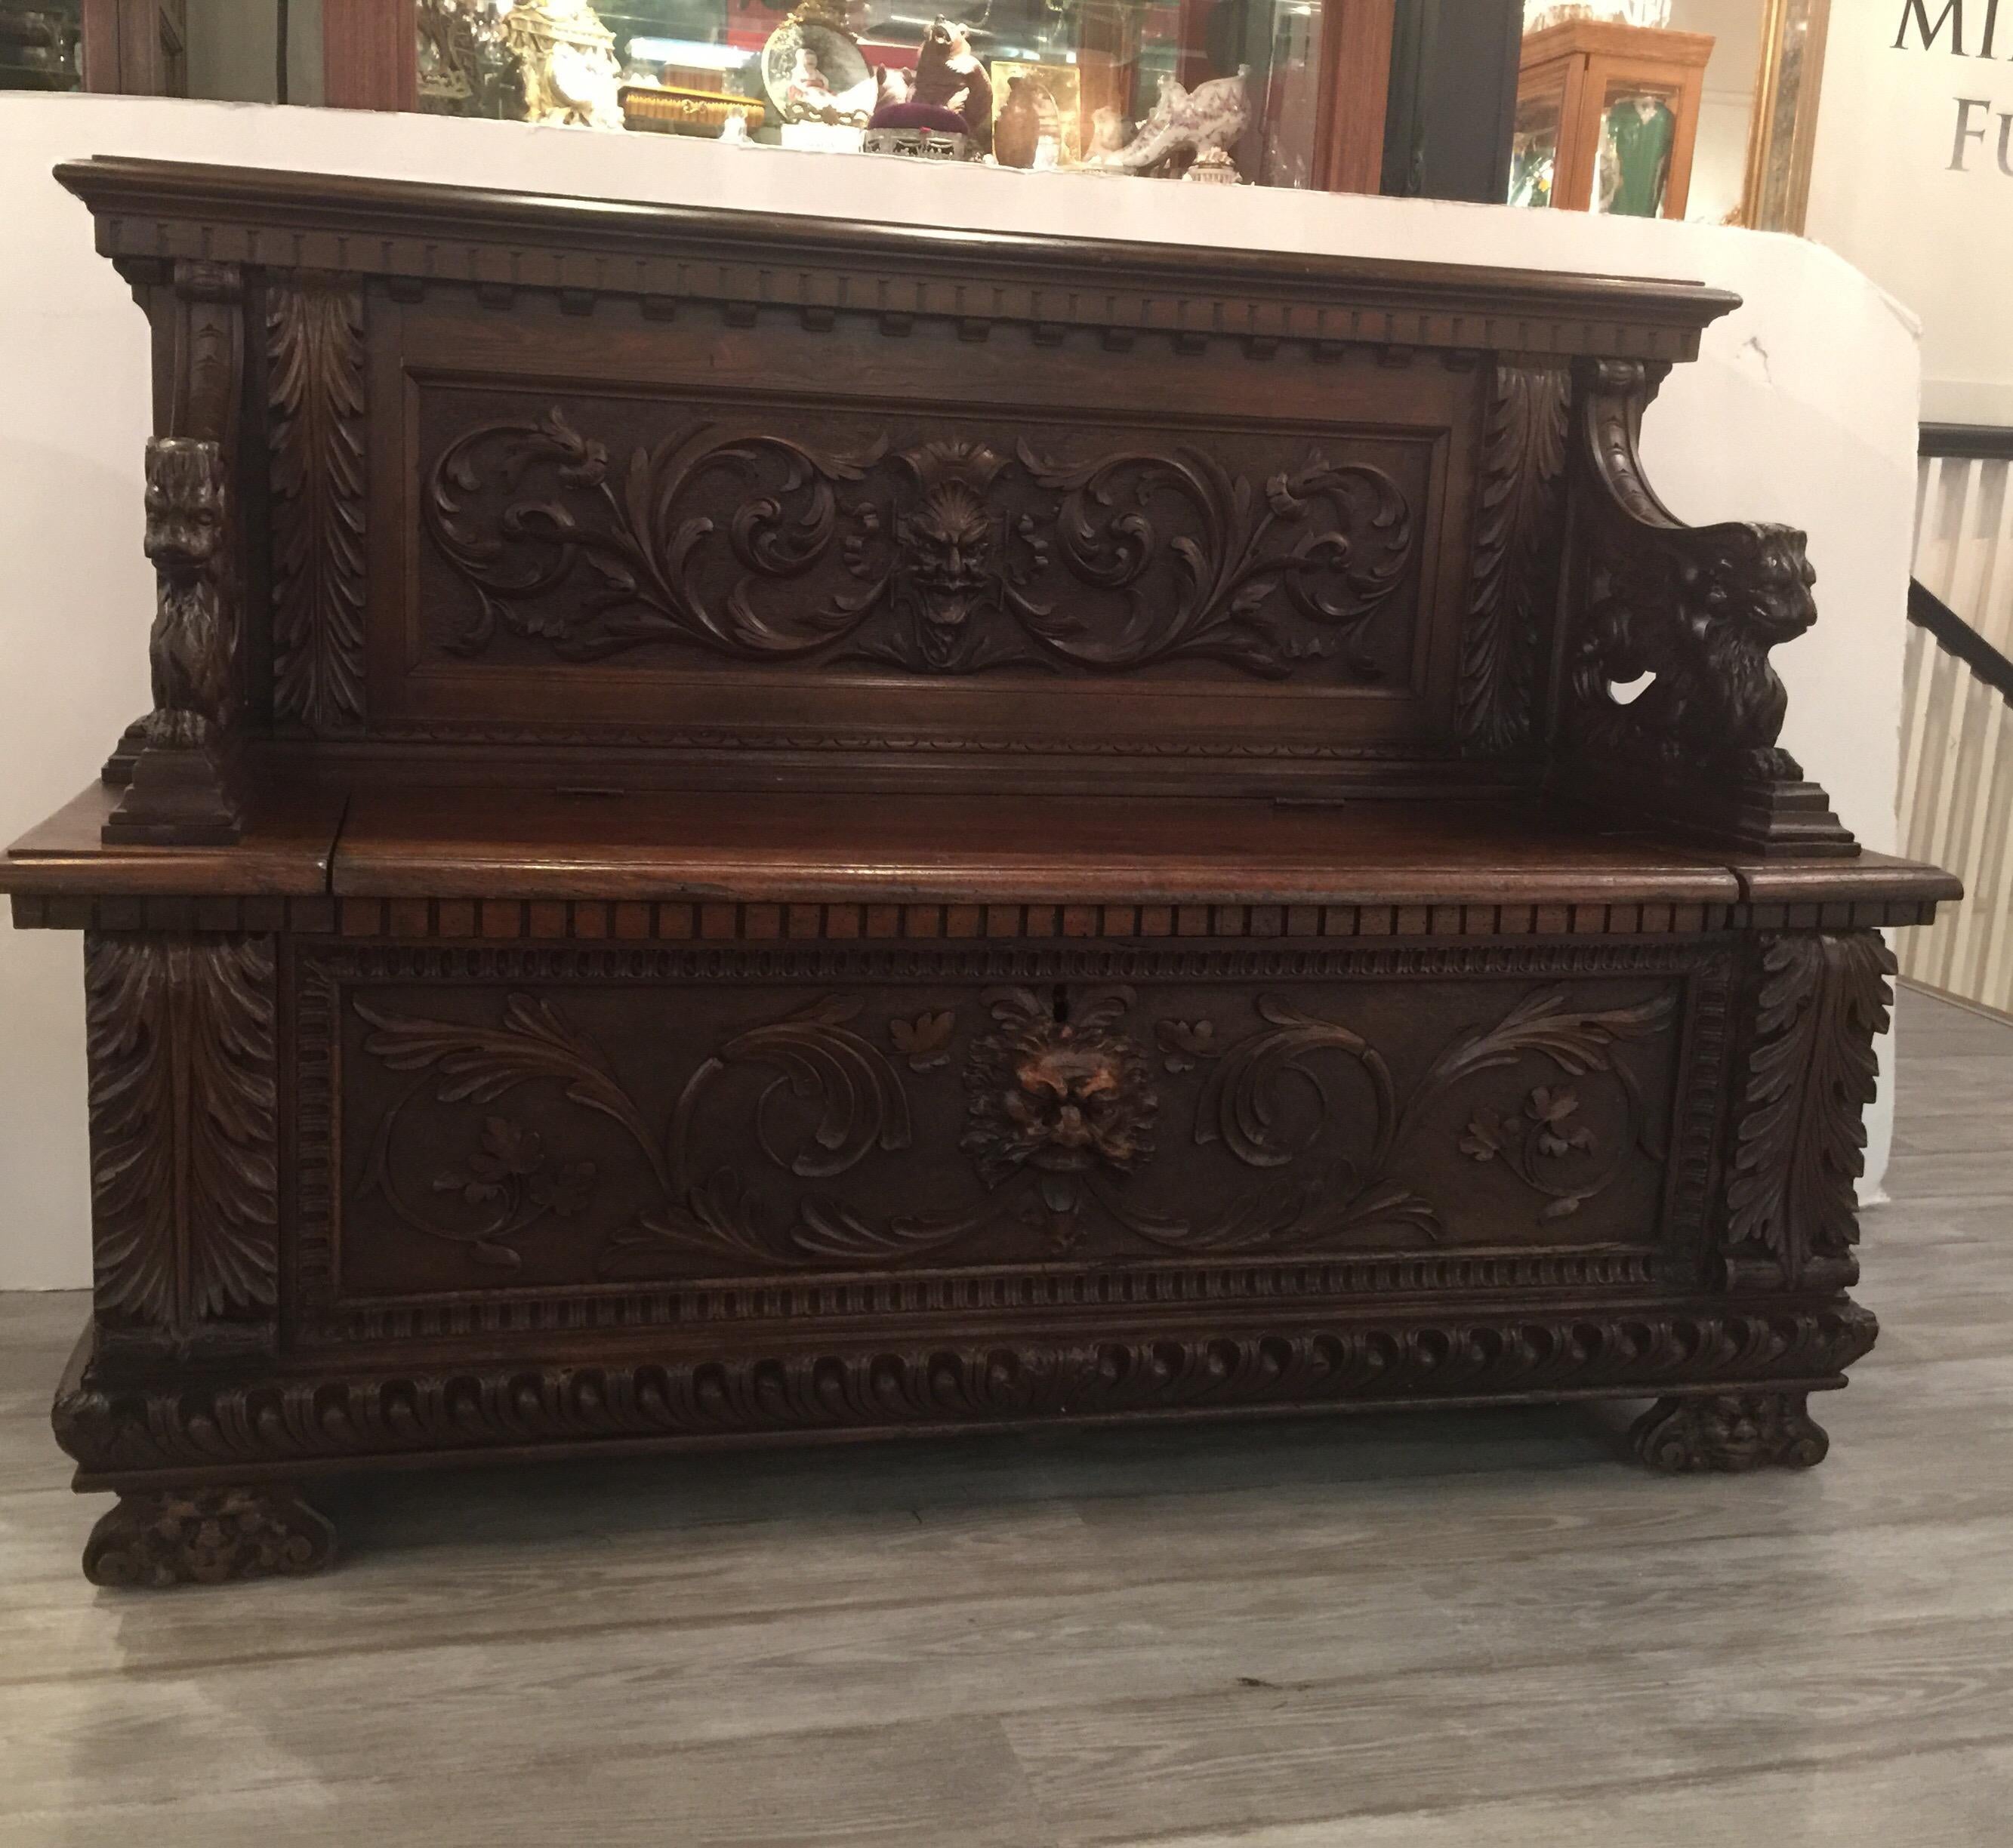 Hand carved European walnut hall bench with griffins and lion faces, circa late 1800s.
Great hand done carvings. Nice hall bench with lift up seat for plenty of storage.
Dimensions: 64